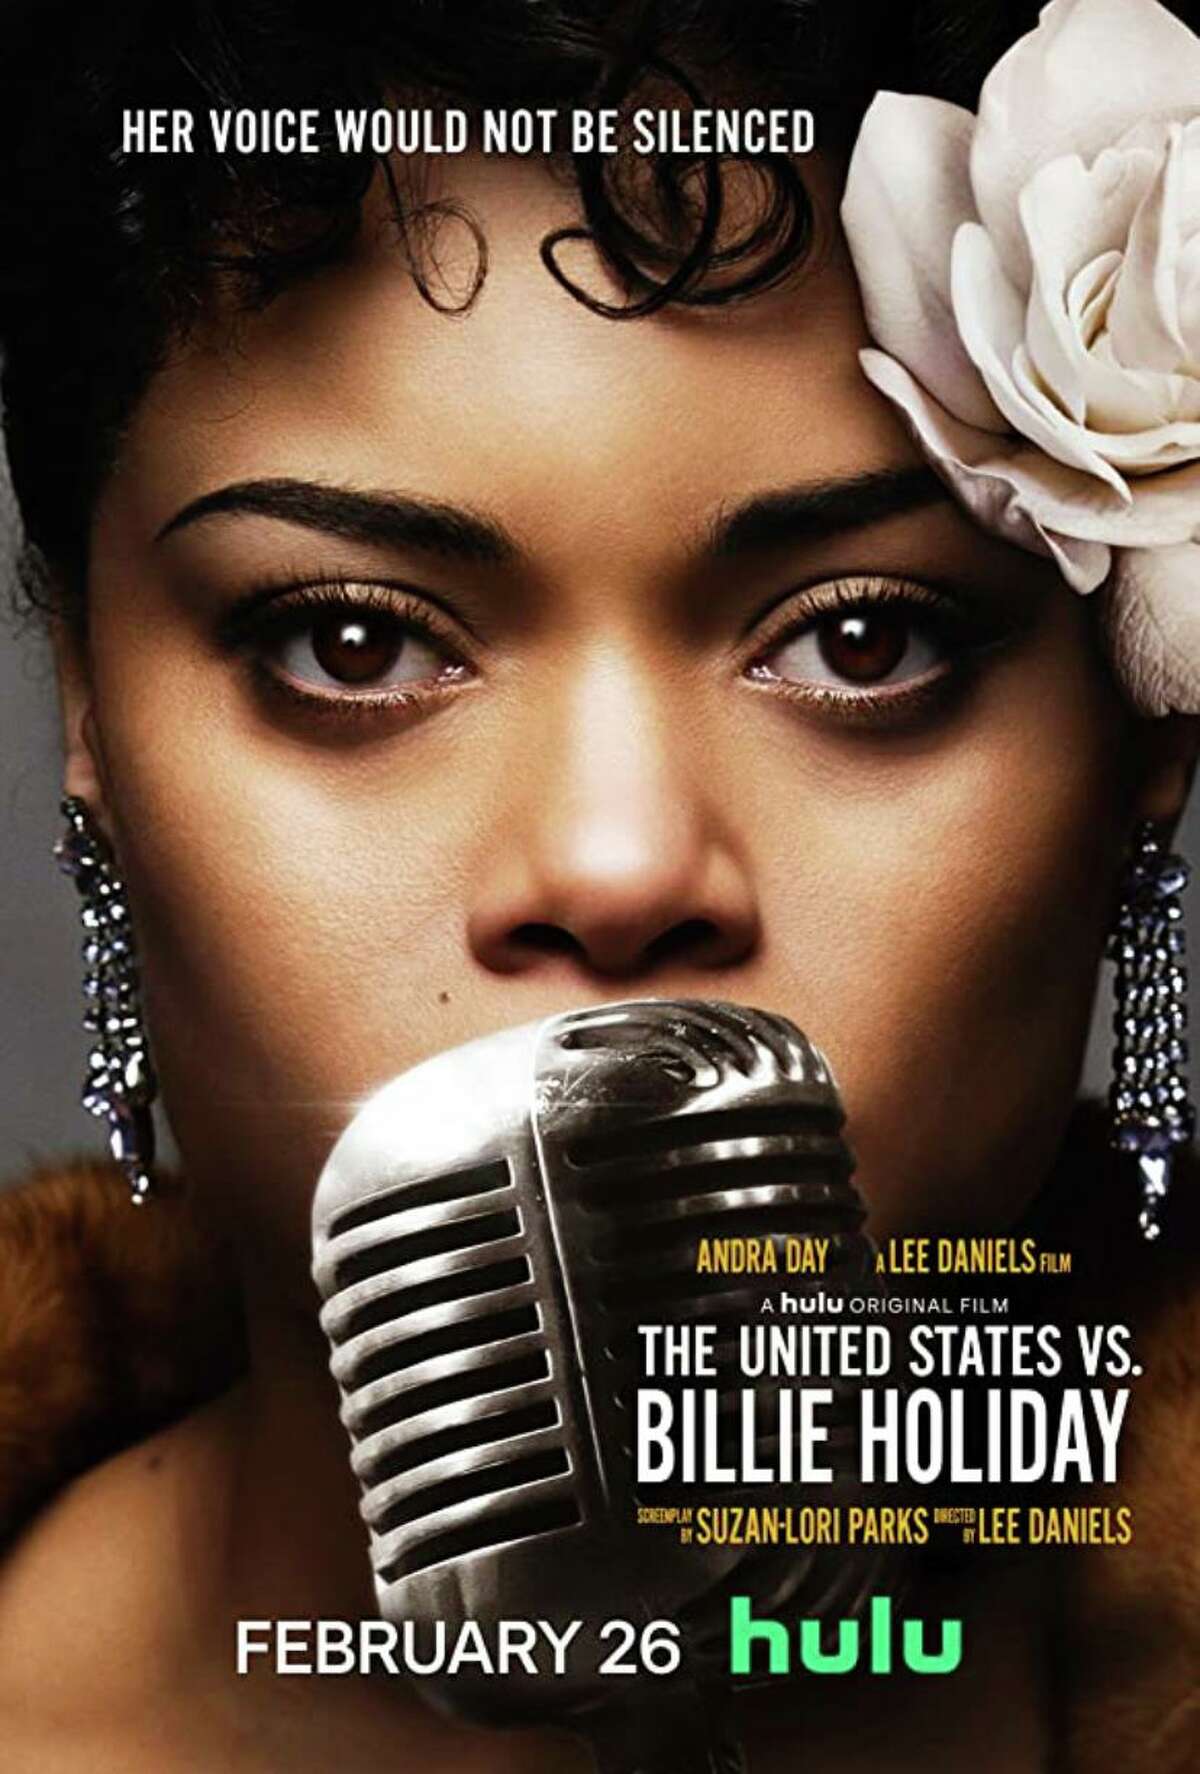 Andra Day stars in “The United States vs. Billie Holiday.”